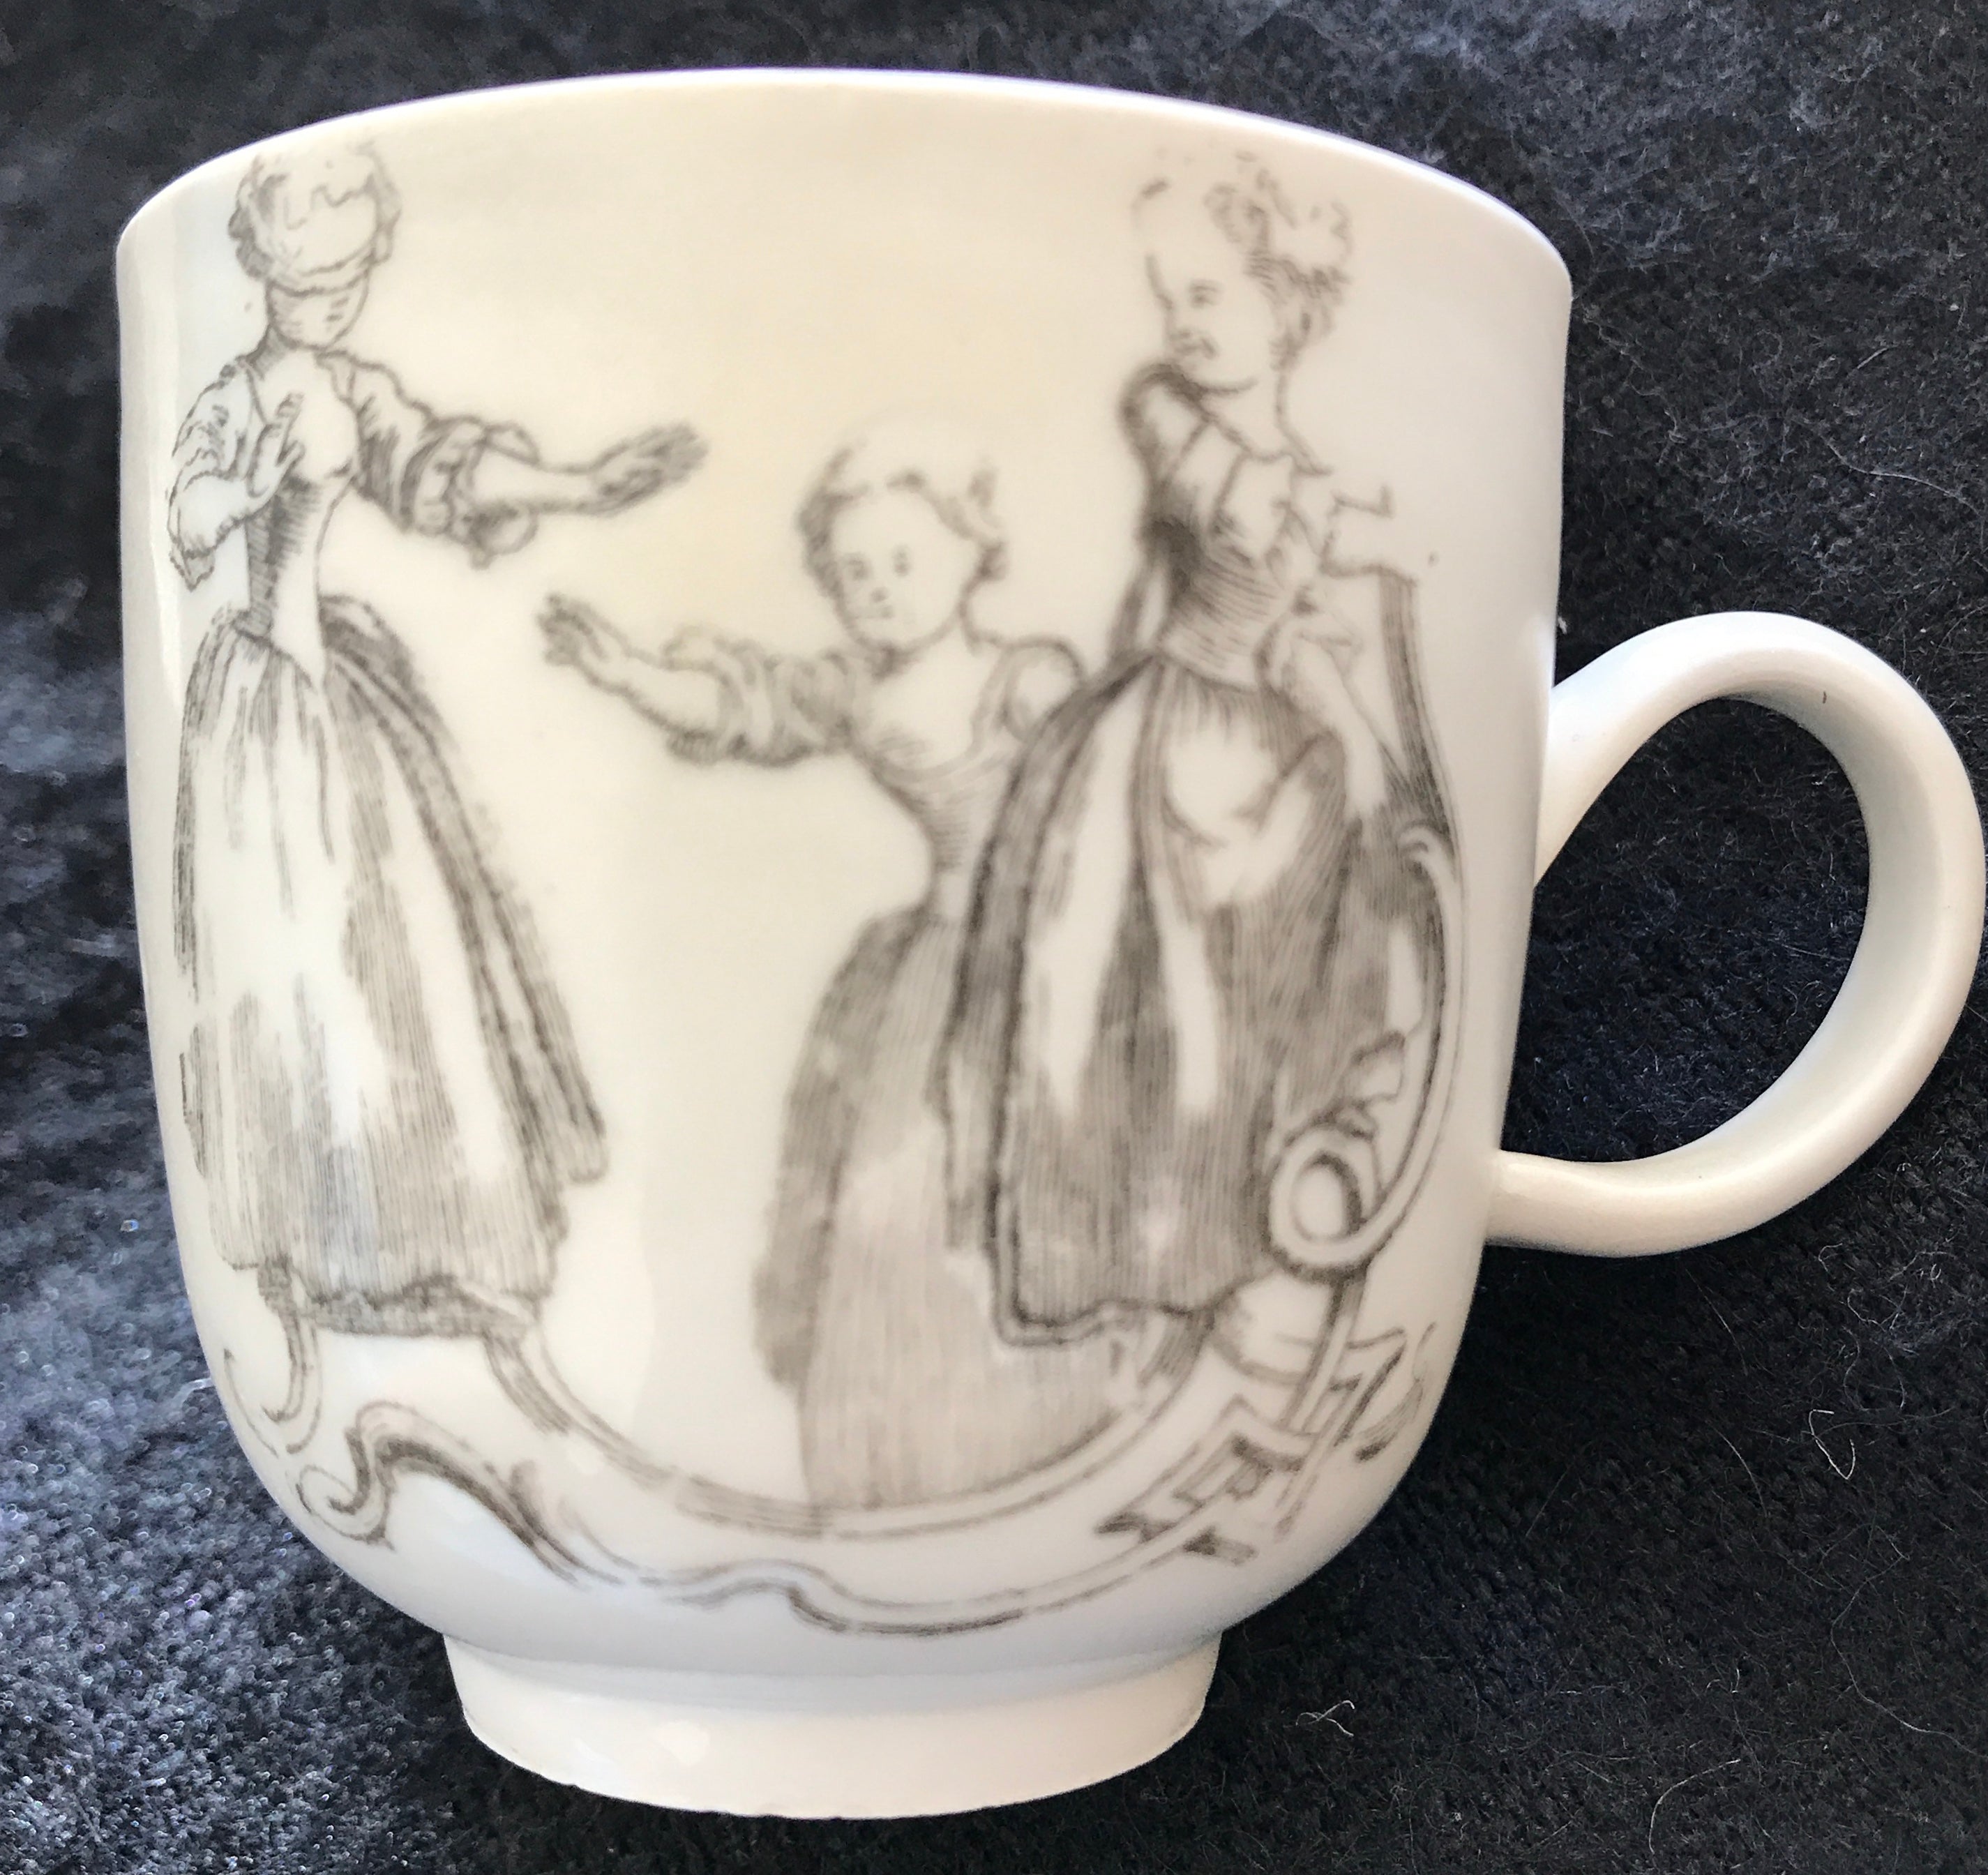 SOLD 18th Century Bristol Porcelain Coffee Cup Transfer Printed after Robert Hancock.